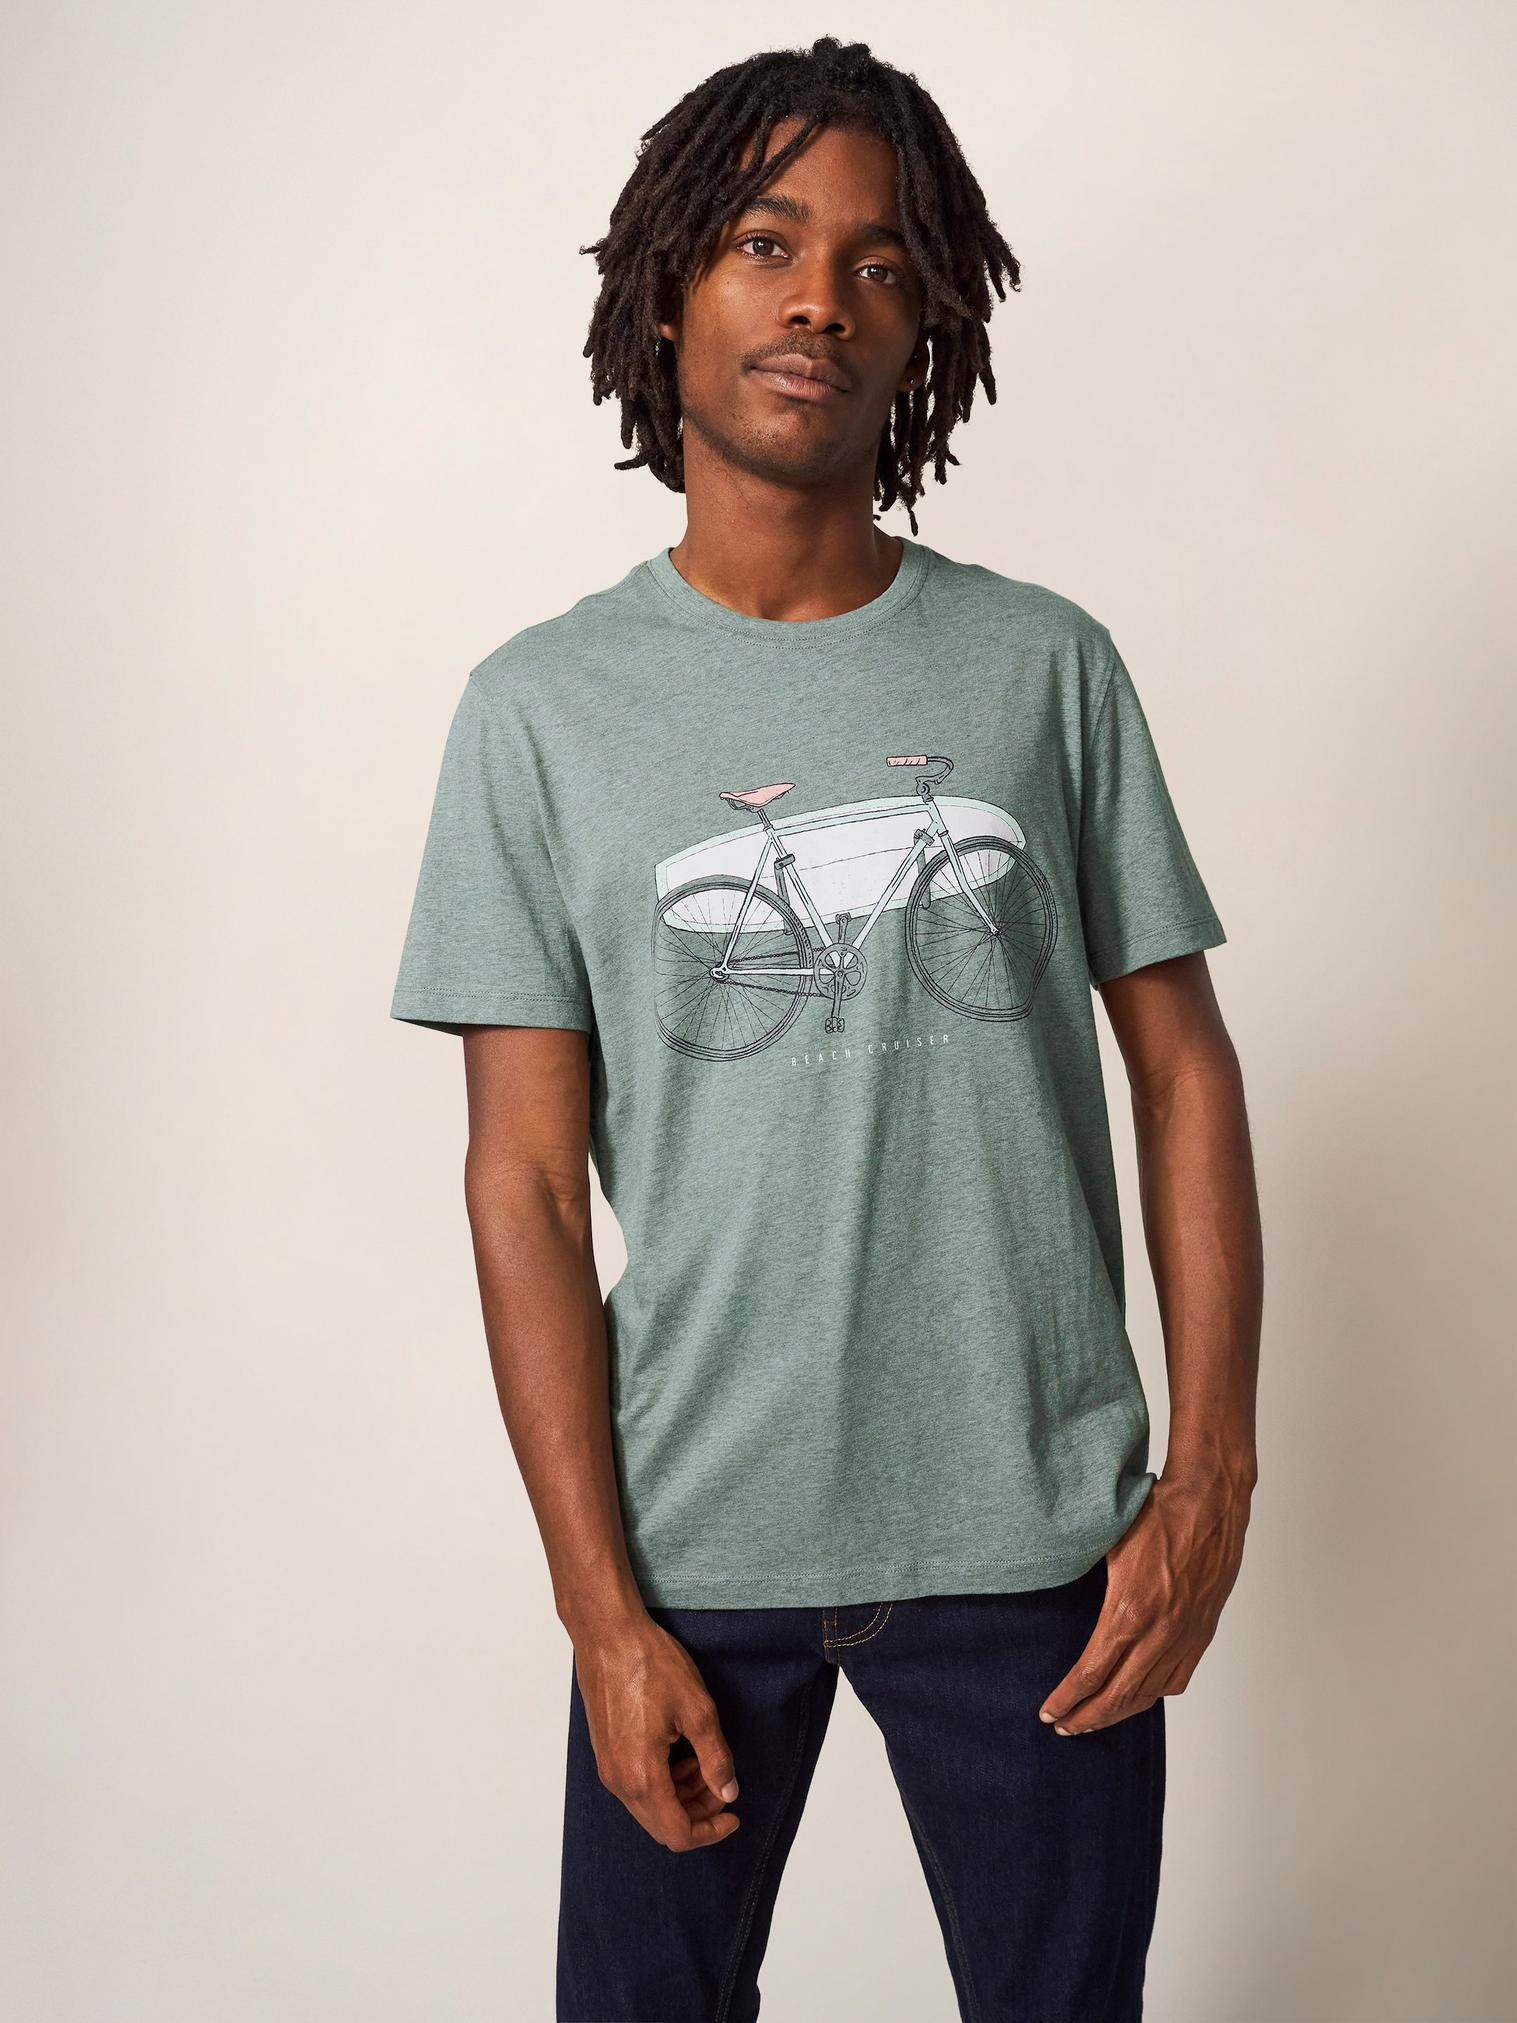 Beach Crusier Graphic Tee in DUS GREEN - LIFESTYLE